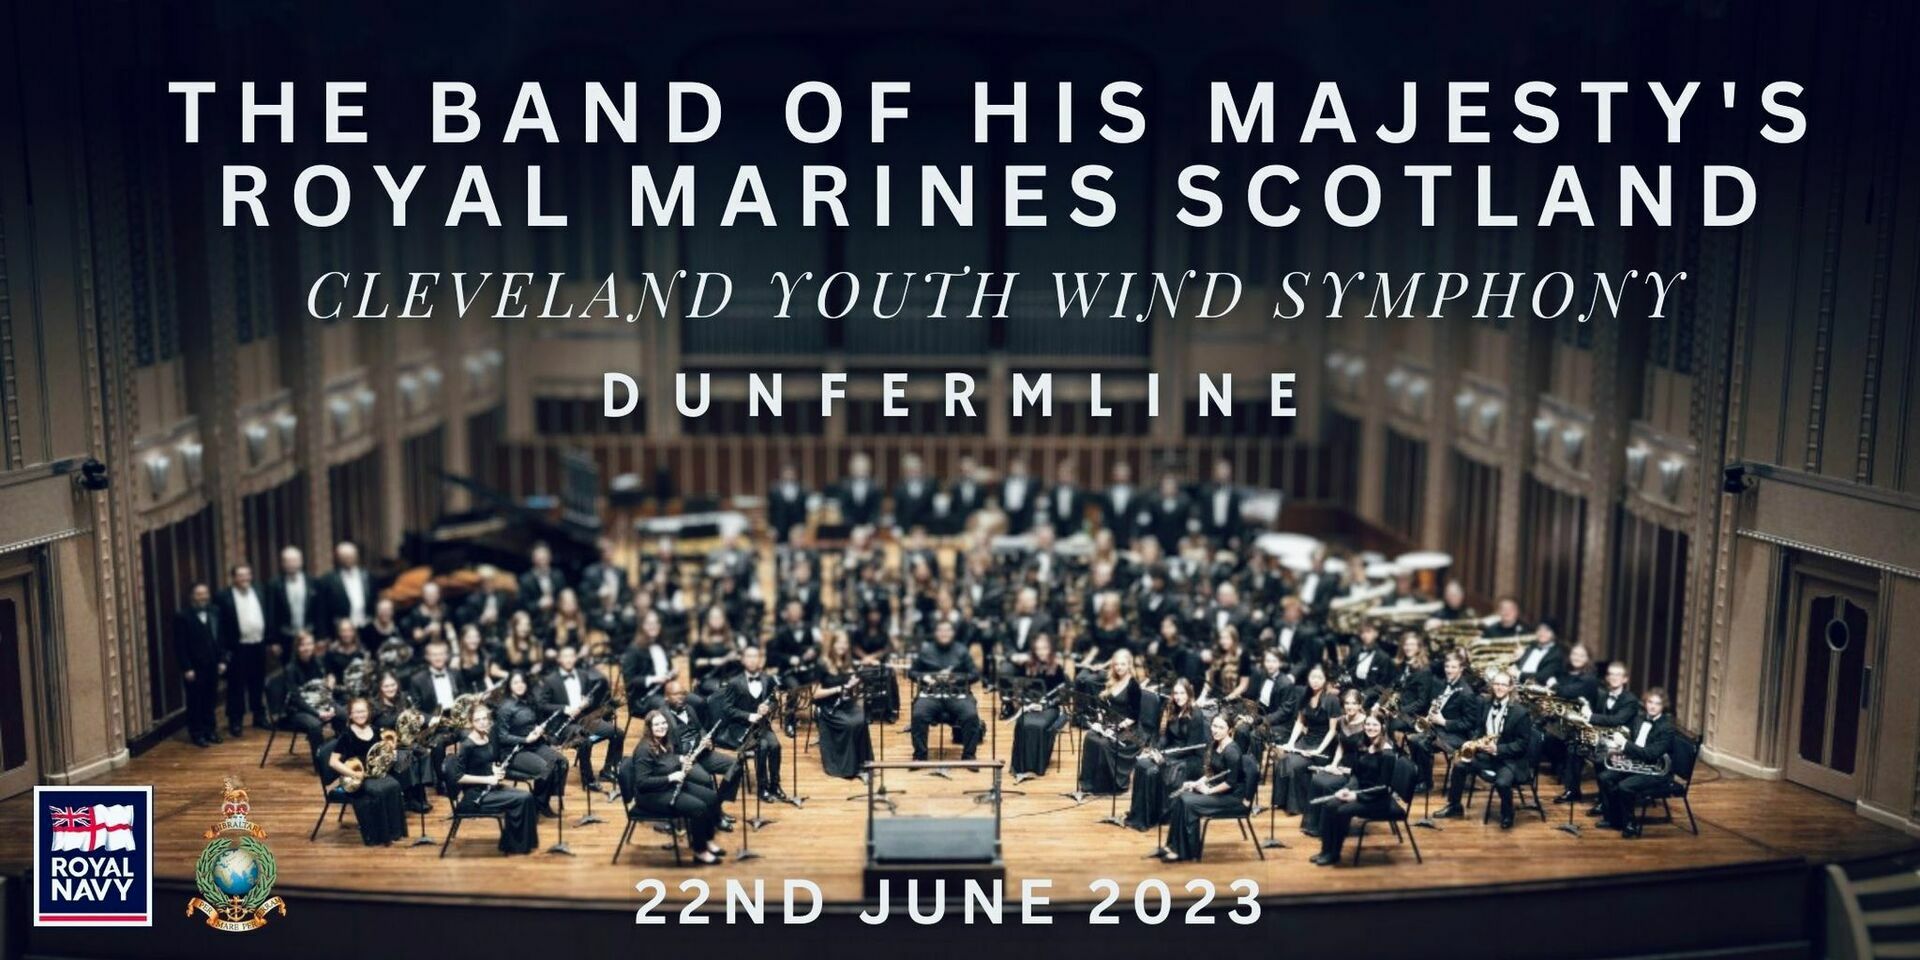 The Band Of HM Royal Marines Scotland in Concert with the Cleveland Youth Wind Symphony, Dunfermline, Scotland, United Kingdom